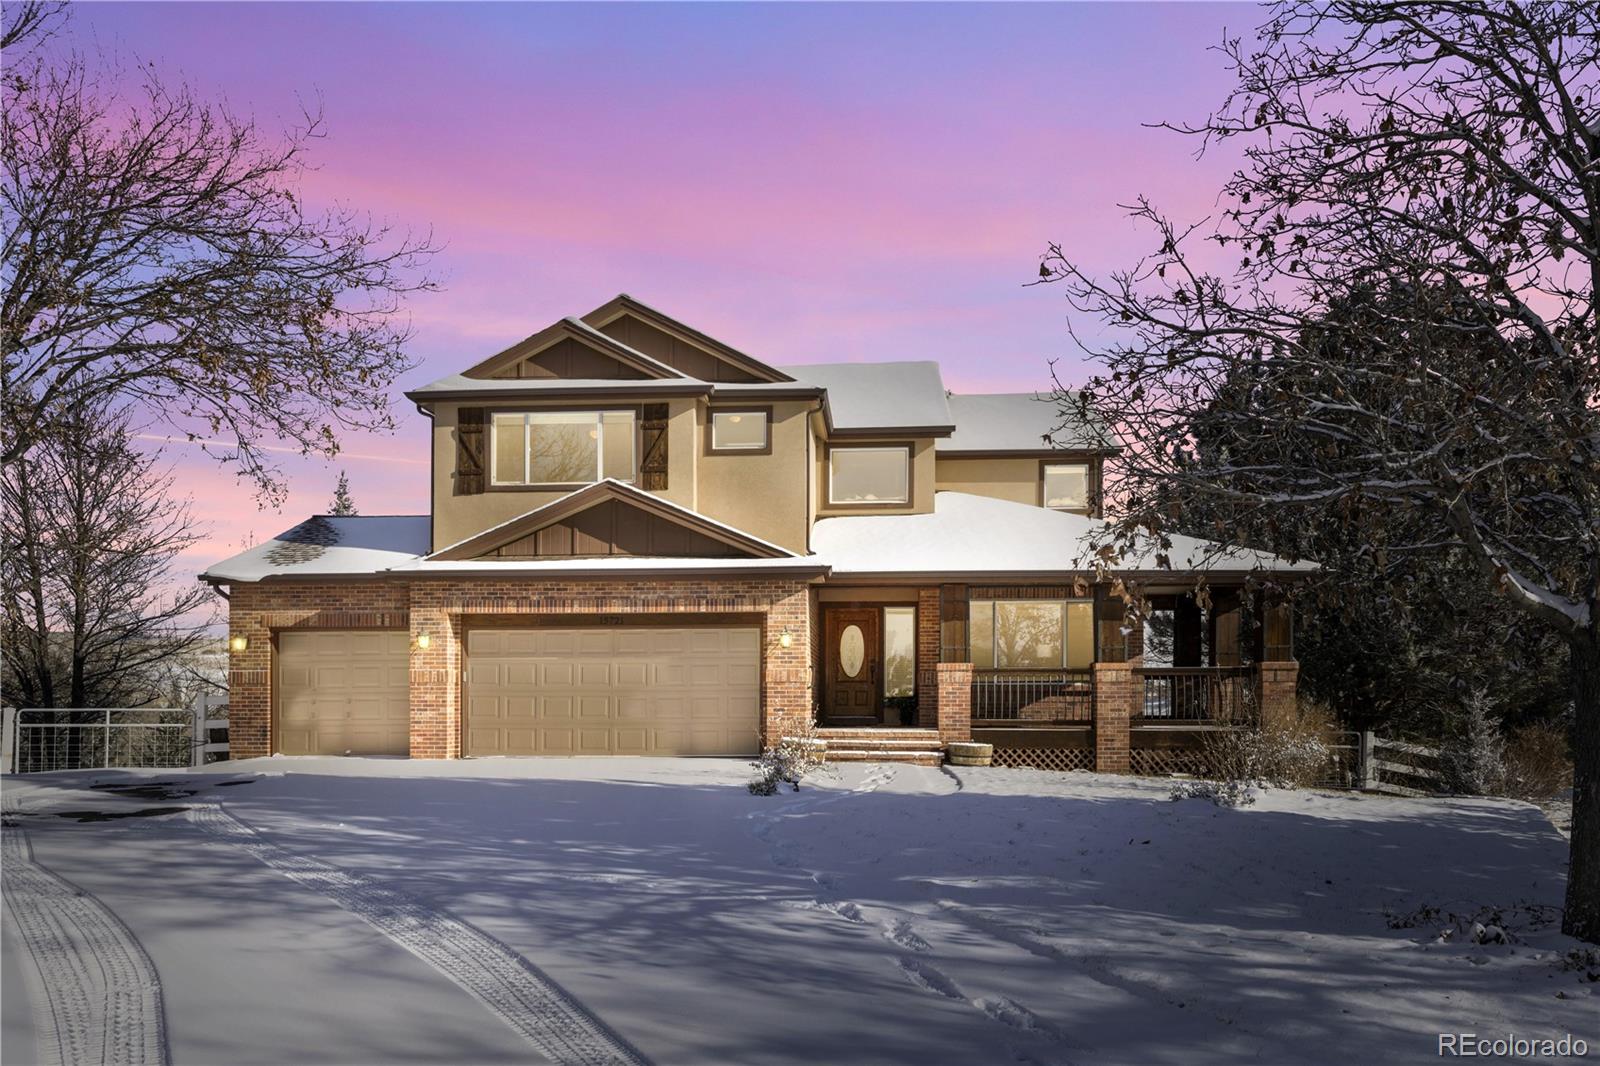 15721 W 79th Place, arvada MLS: 5742268 Beds: 5 Baths: 4 Price: $1,100,000